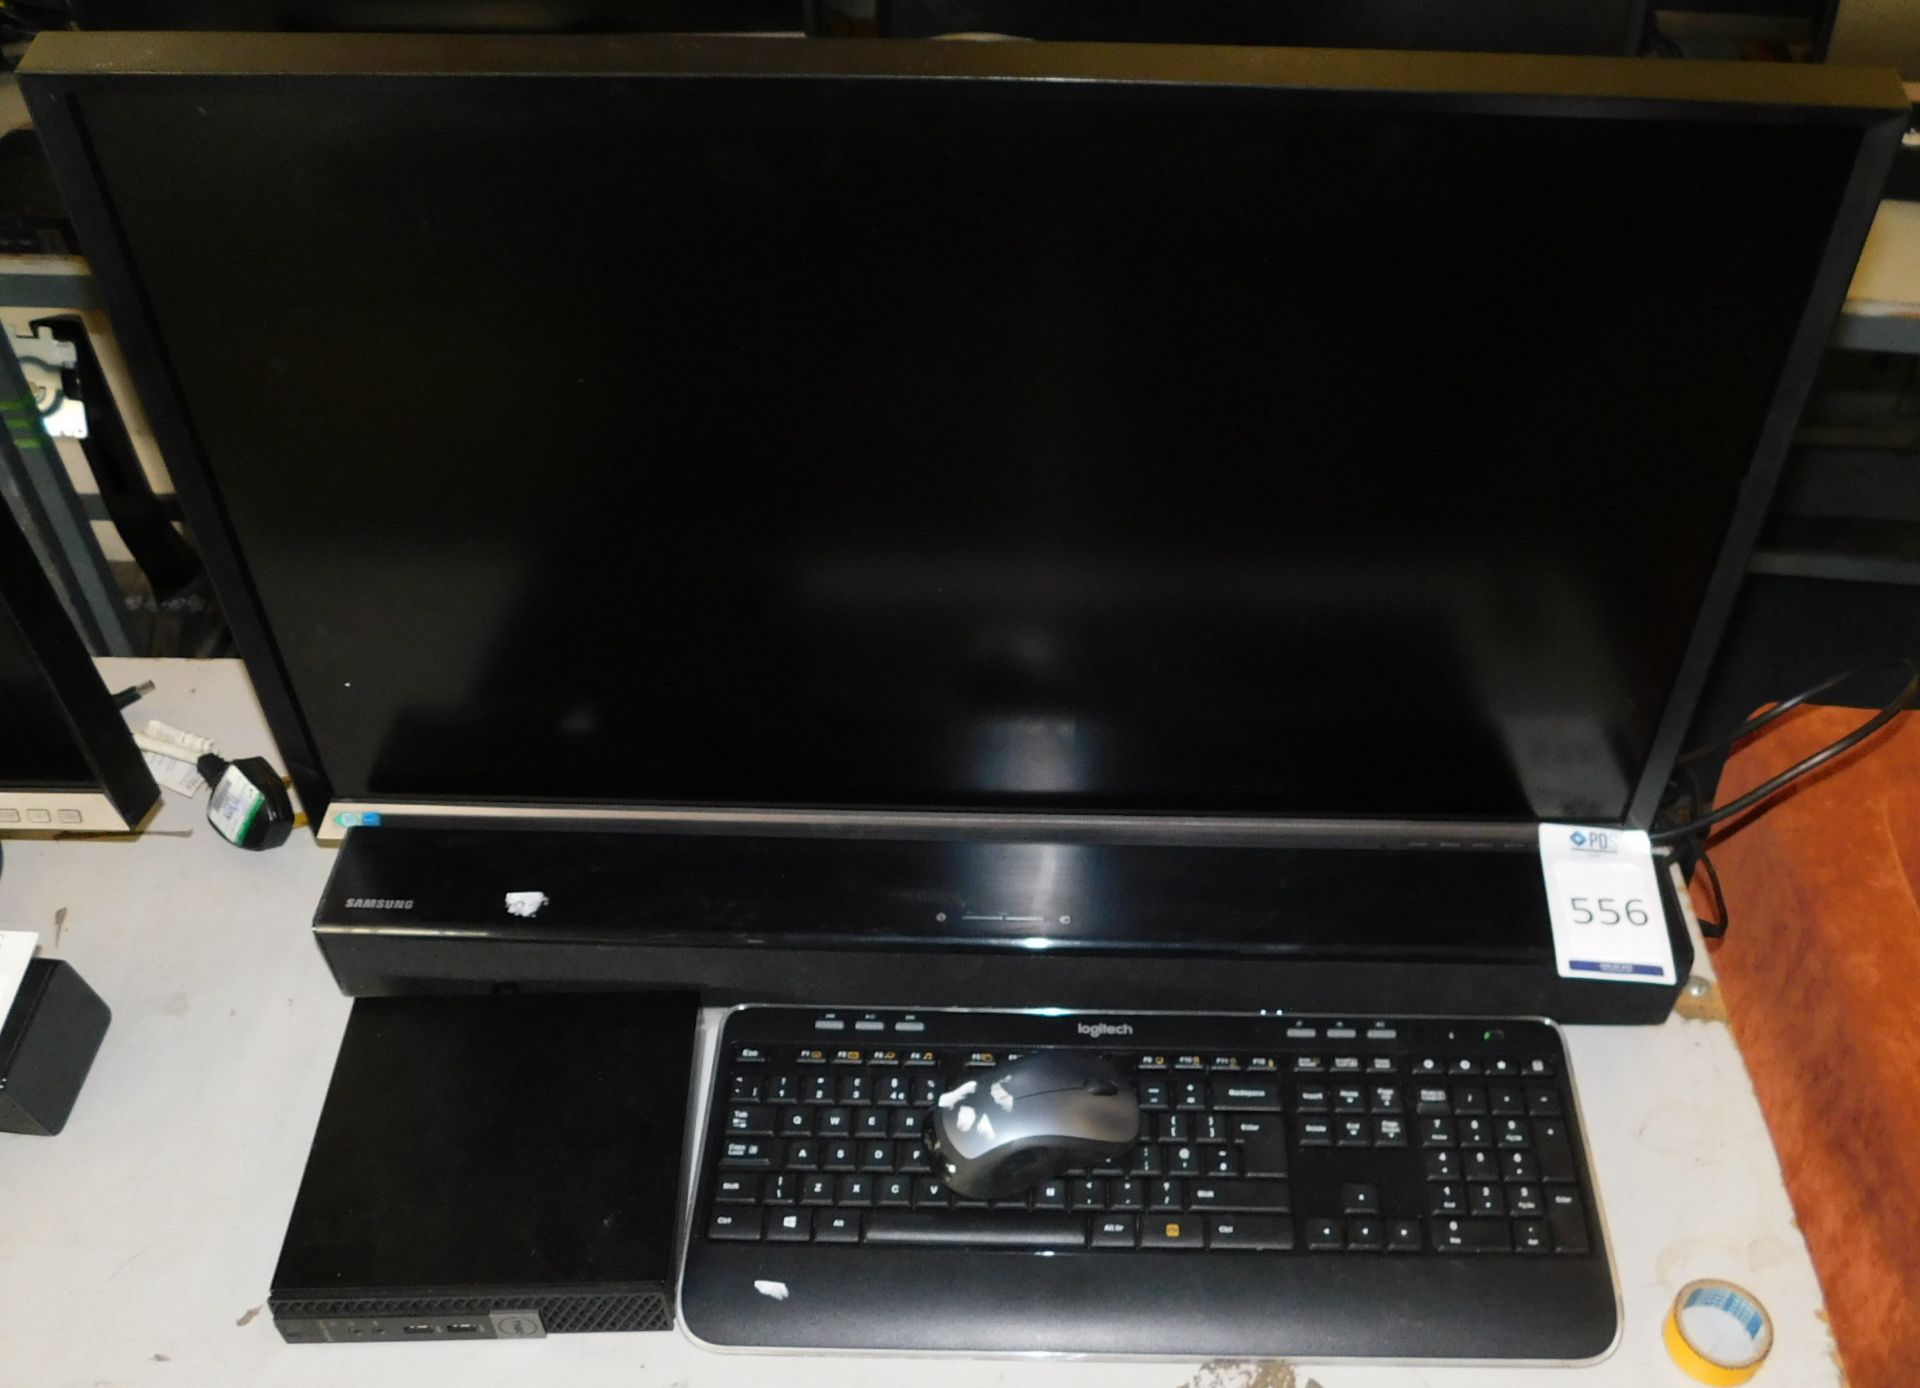 Media Suite Comprising: Samsung S32D850T 32in Colour Display Unit with stand; Samsung HW-J250